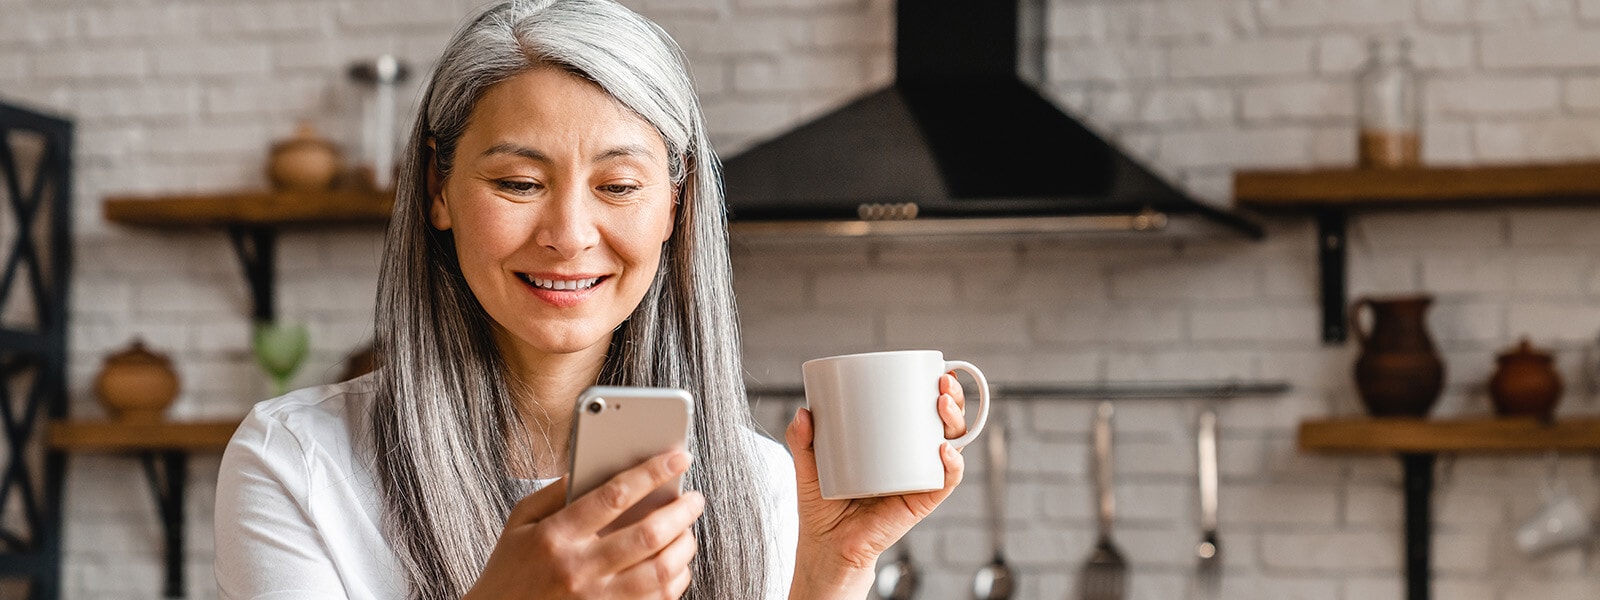 Woman with a coffee mug looking at her phone to look up what a good credit score is.